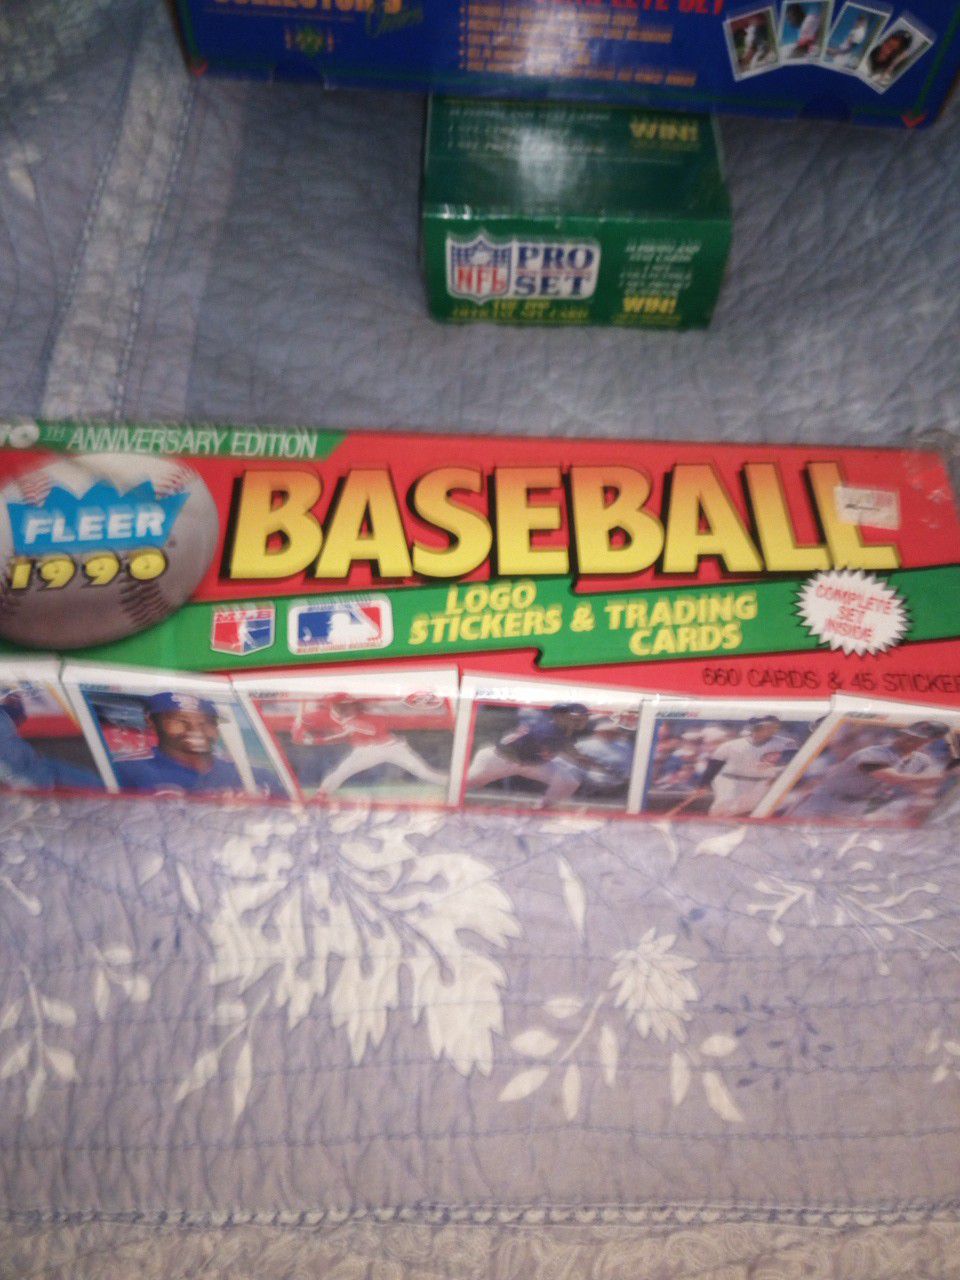 Fleer 1990 10th anniversary edition baseball cards logo stickers and trading cards 660 cards and 45 stickers complete set unopened box